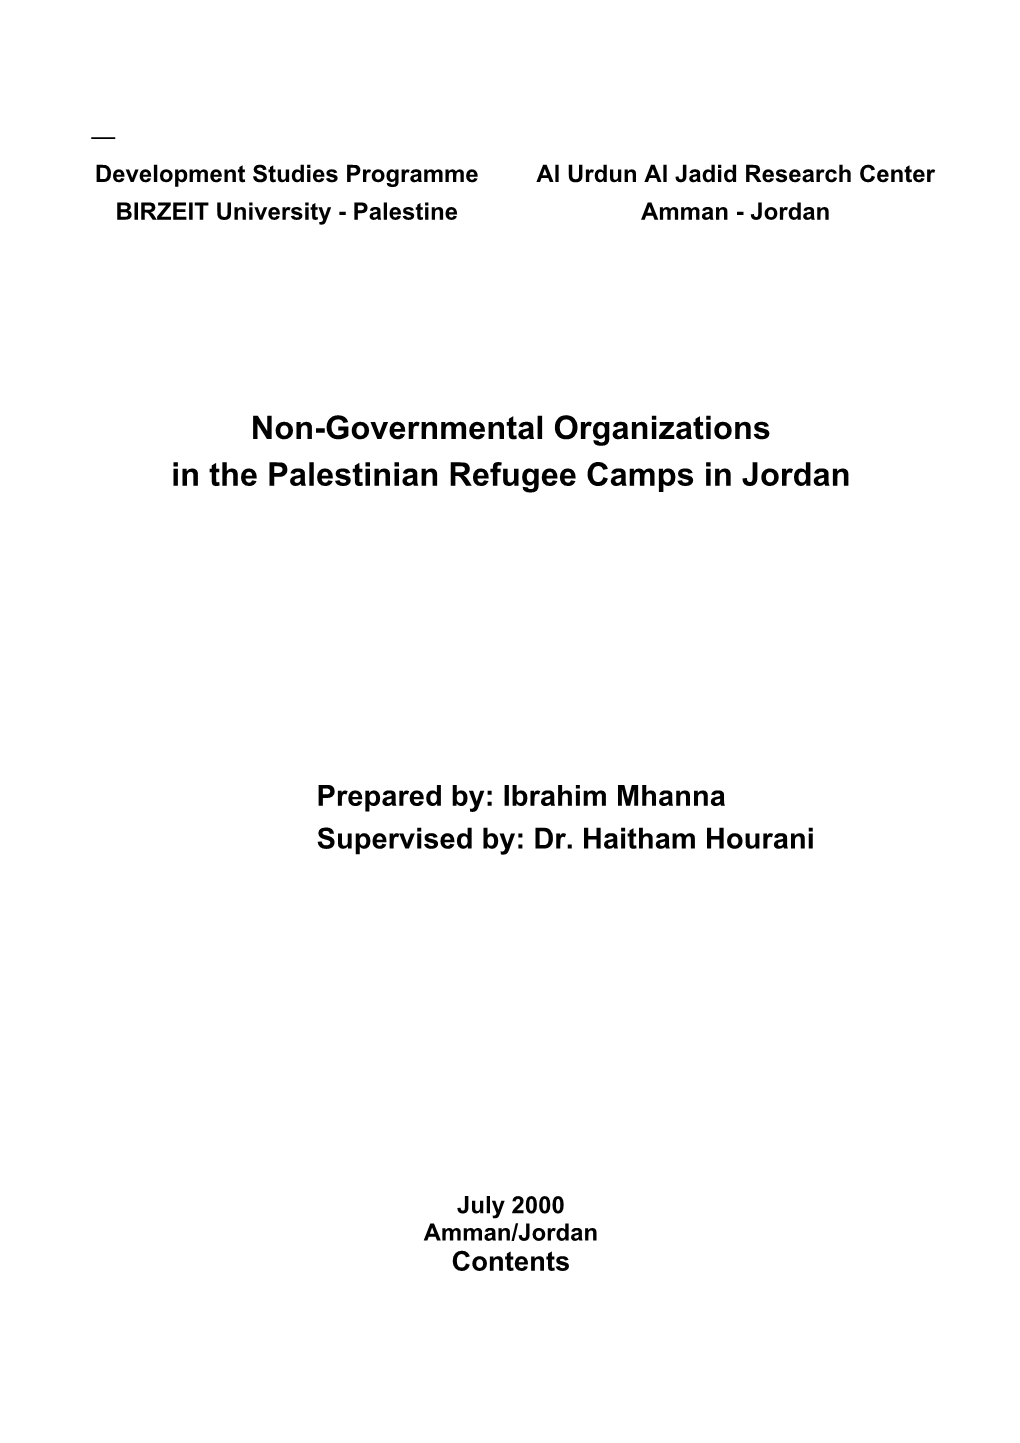 Non-Governmental Organizations in the Palestinian Refugee Camps in Jordan